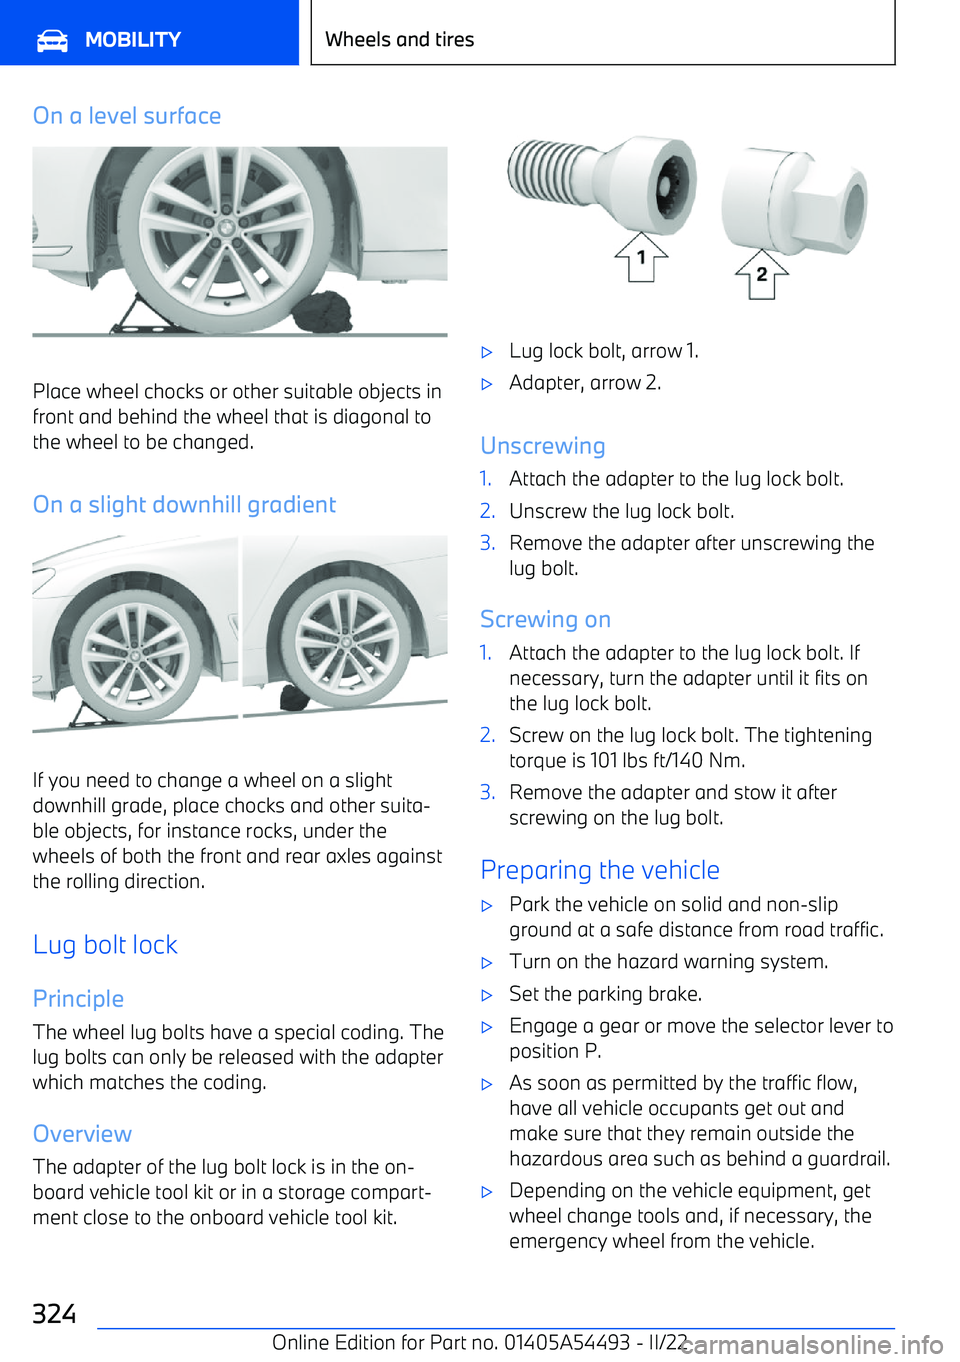 BMW IX 2022  Owners Manual On a level surface
Place wheel chocks or other suitable objects infront and behind the wheel that is diagonal to
the wheel to be changed.
On a slight downhill gradient
If you need to change a wheel on